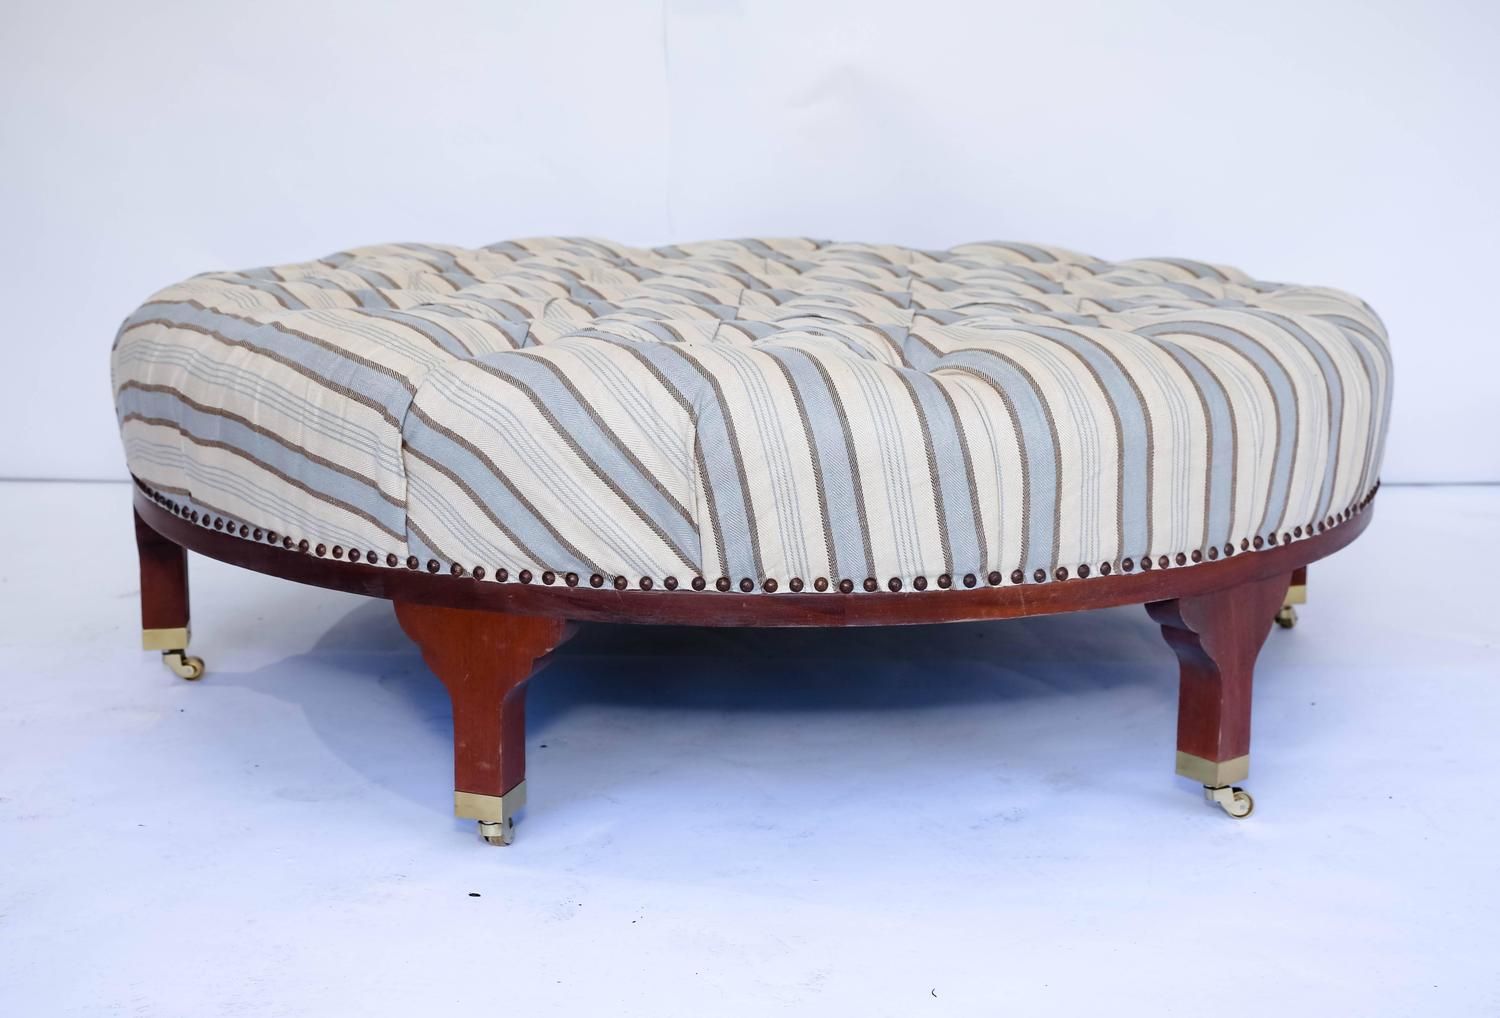 Large Round Tufted Ottoman With Striped Upholstery At 1stdibs With Regard To Round Pouf Ottomans (View 19 of 20)